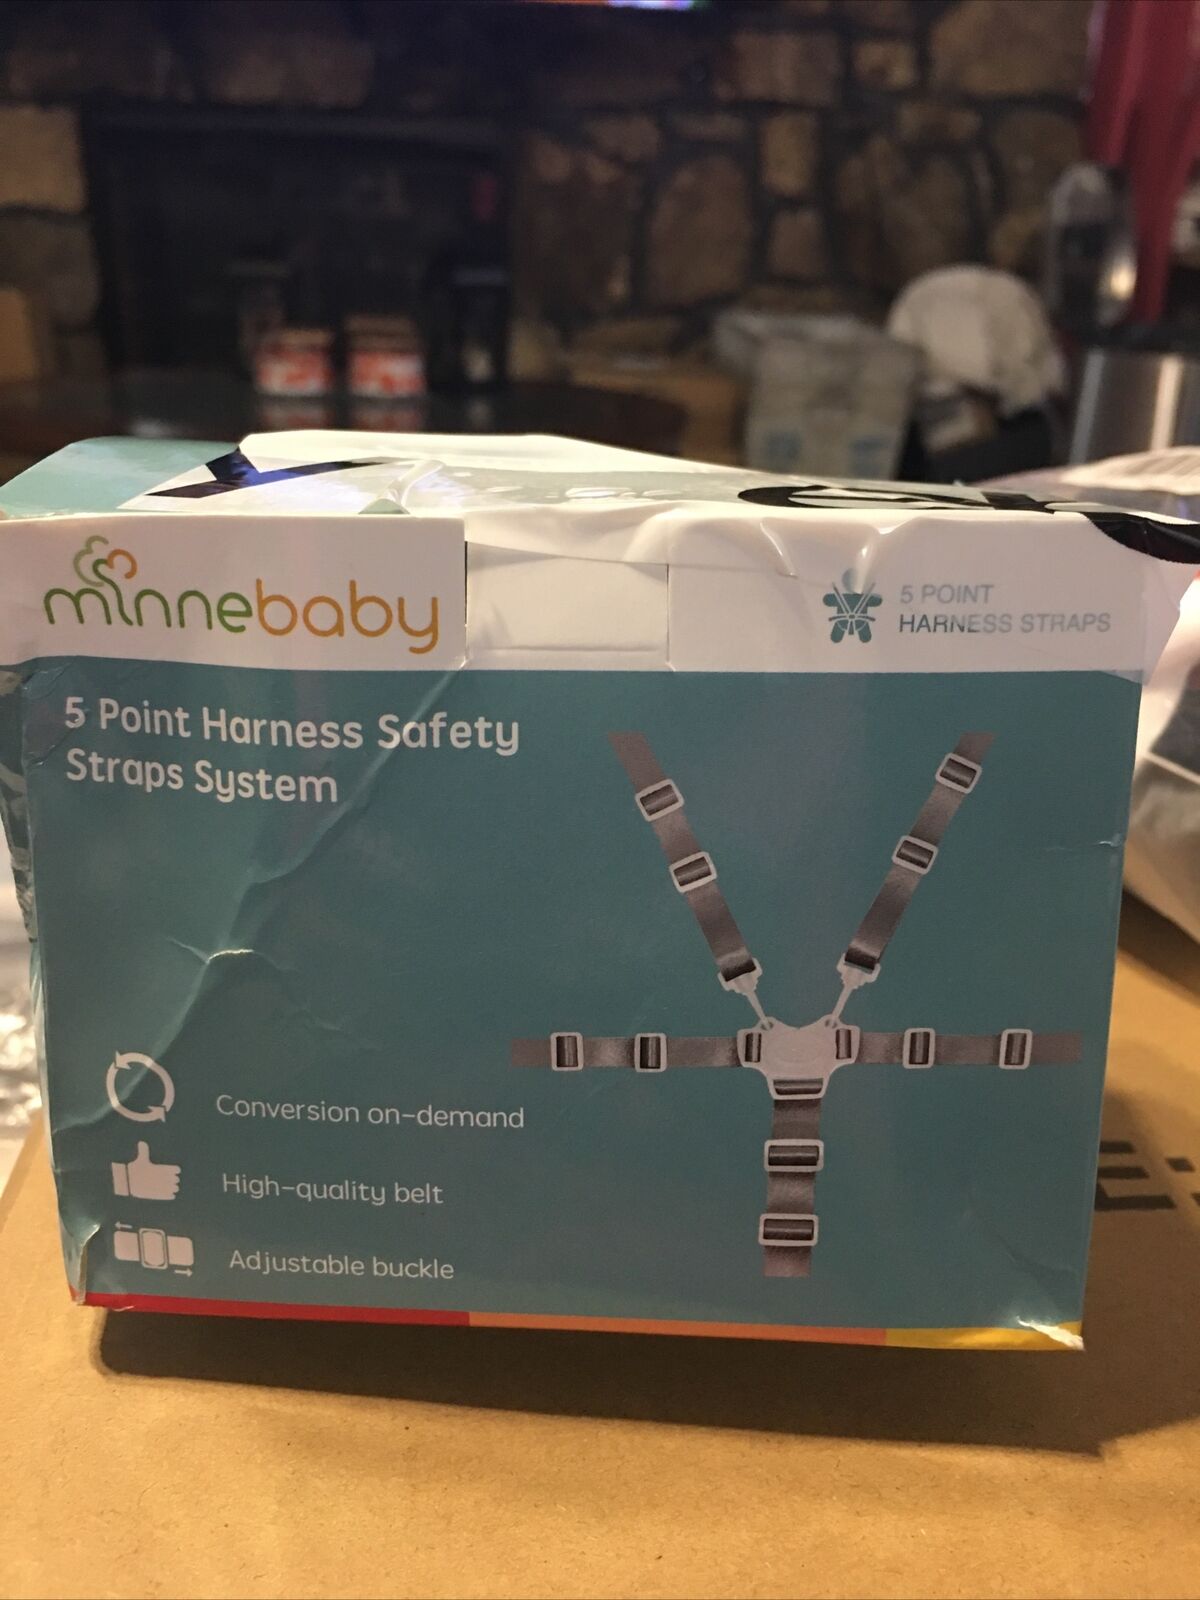 Minnebaby 5 Point Harness Safety Straps System Box Dented